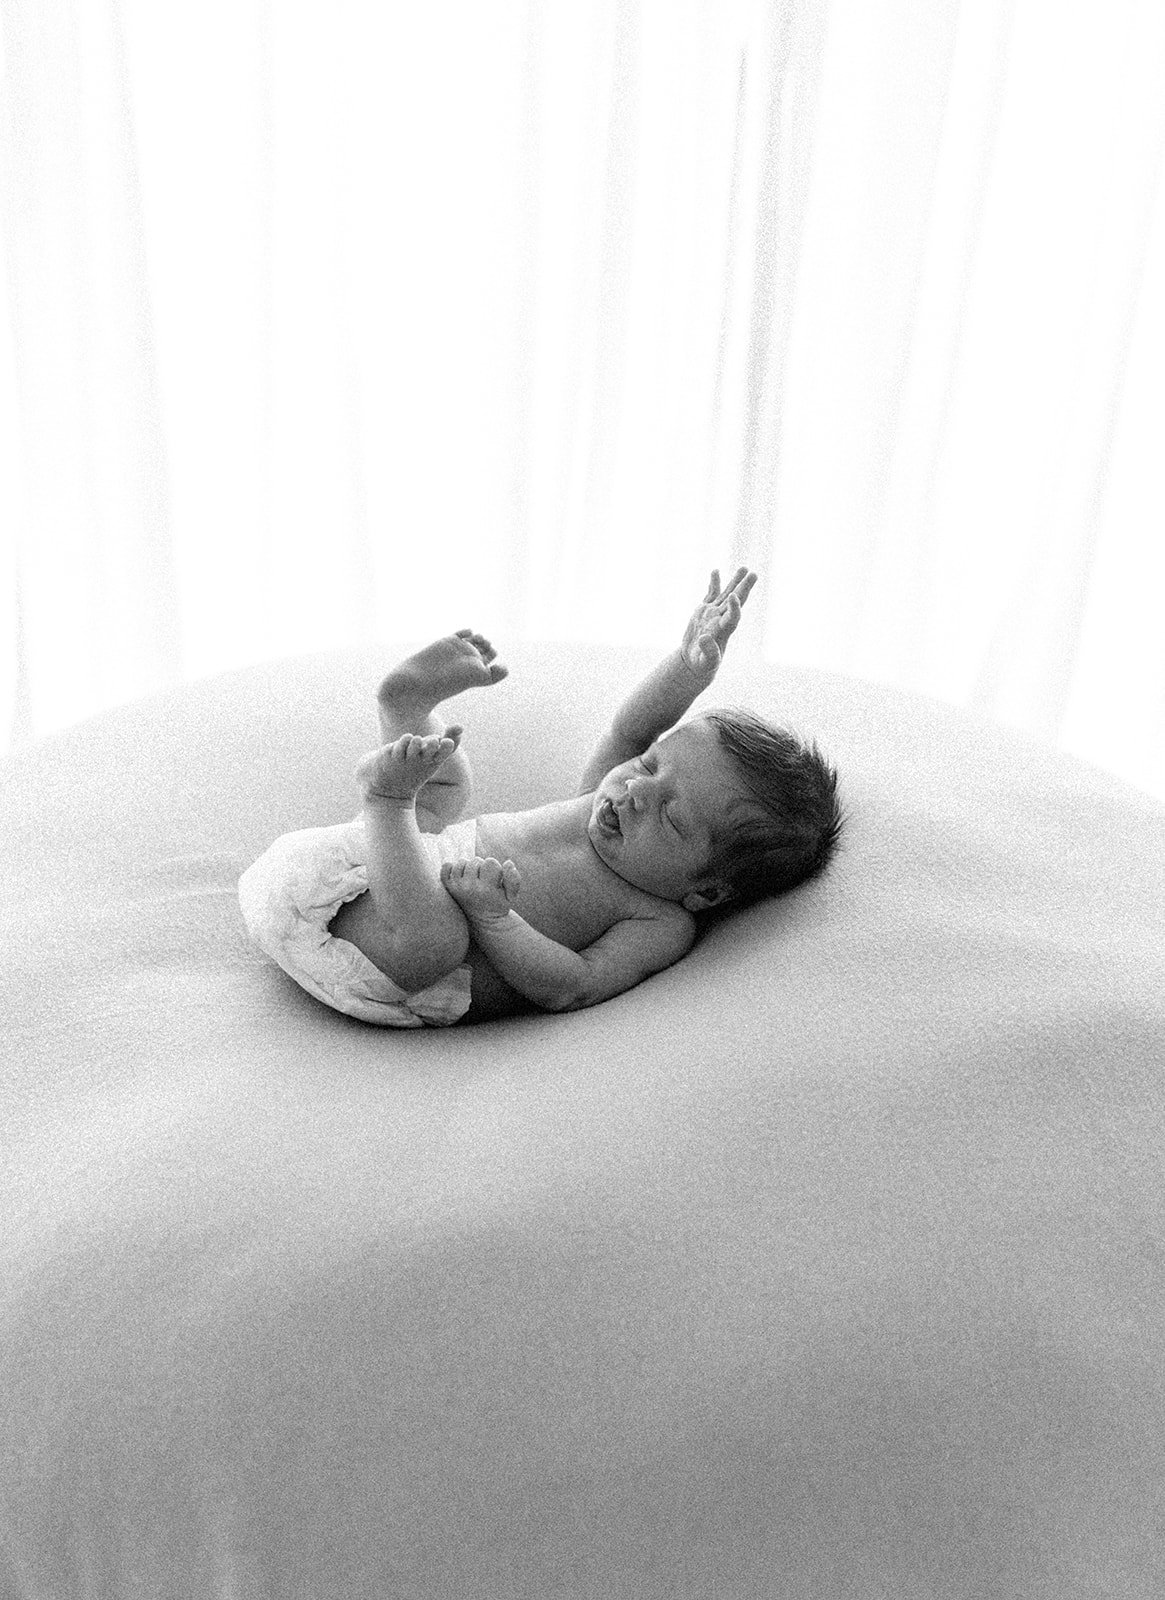 a black and white photo of a newborn baby wearing a just a nappy while it gives a big post nap stretch